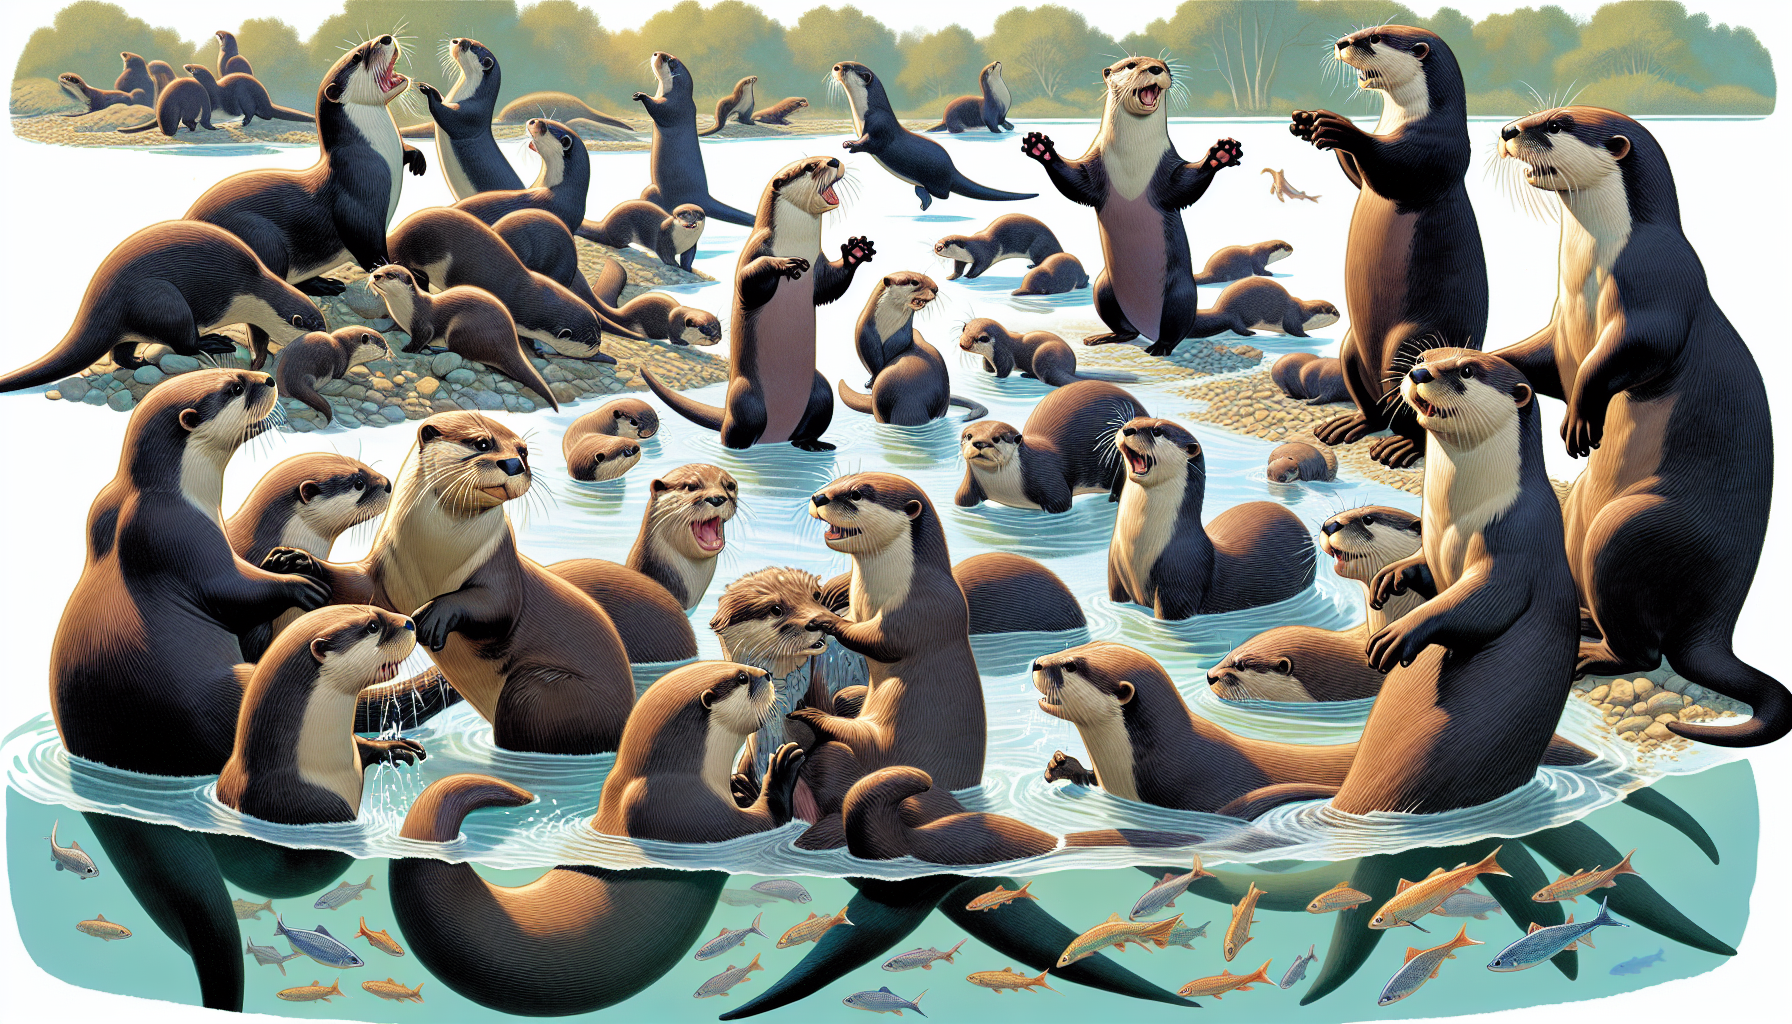 Illustration of a group of giant river otters engaging in social behavior